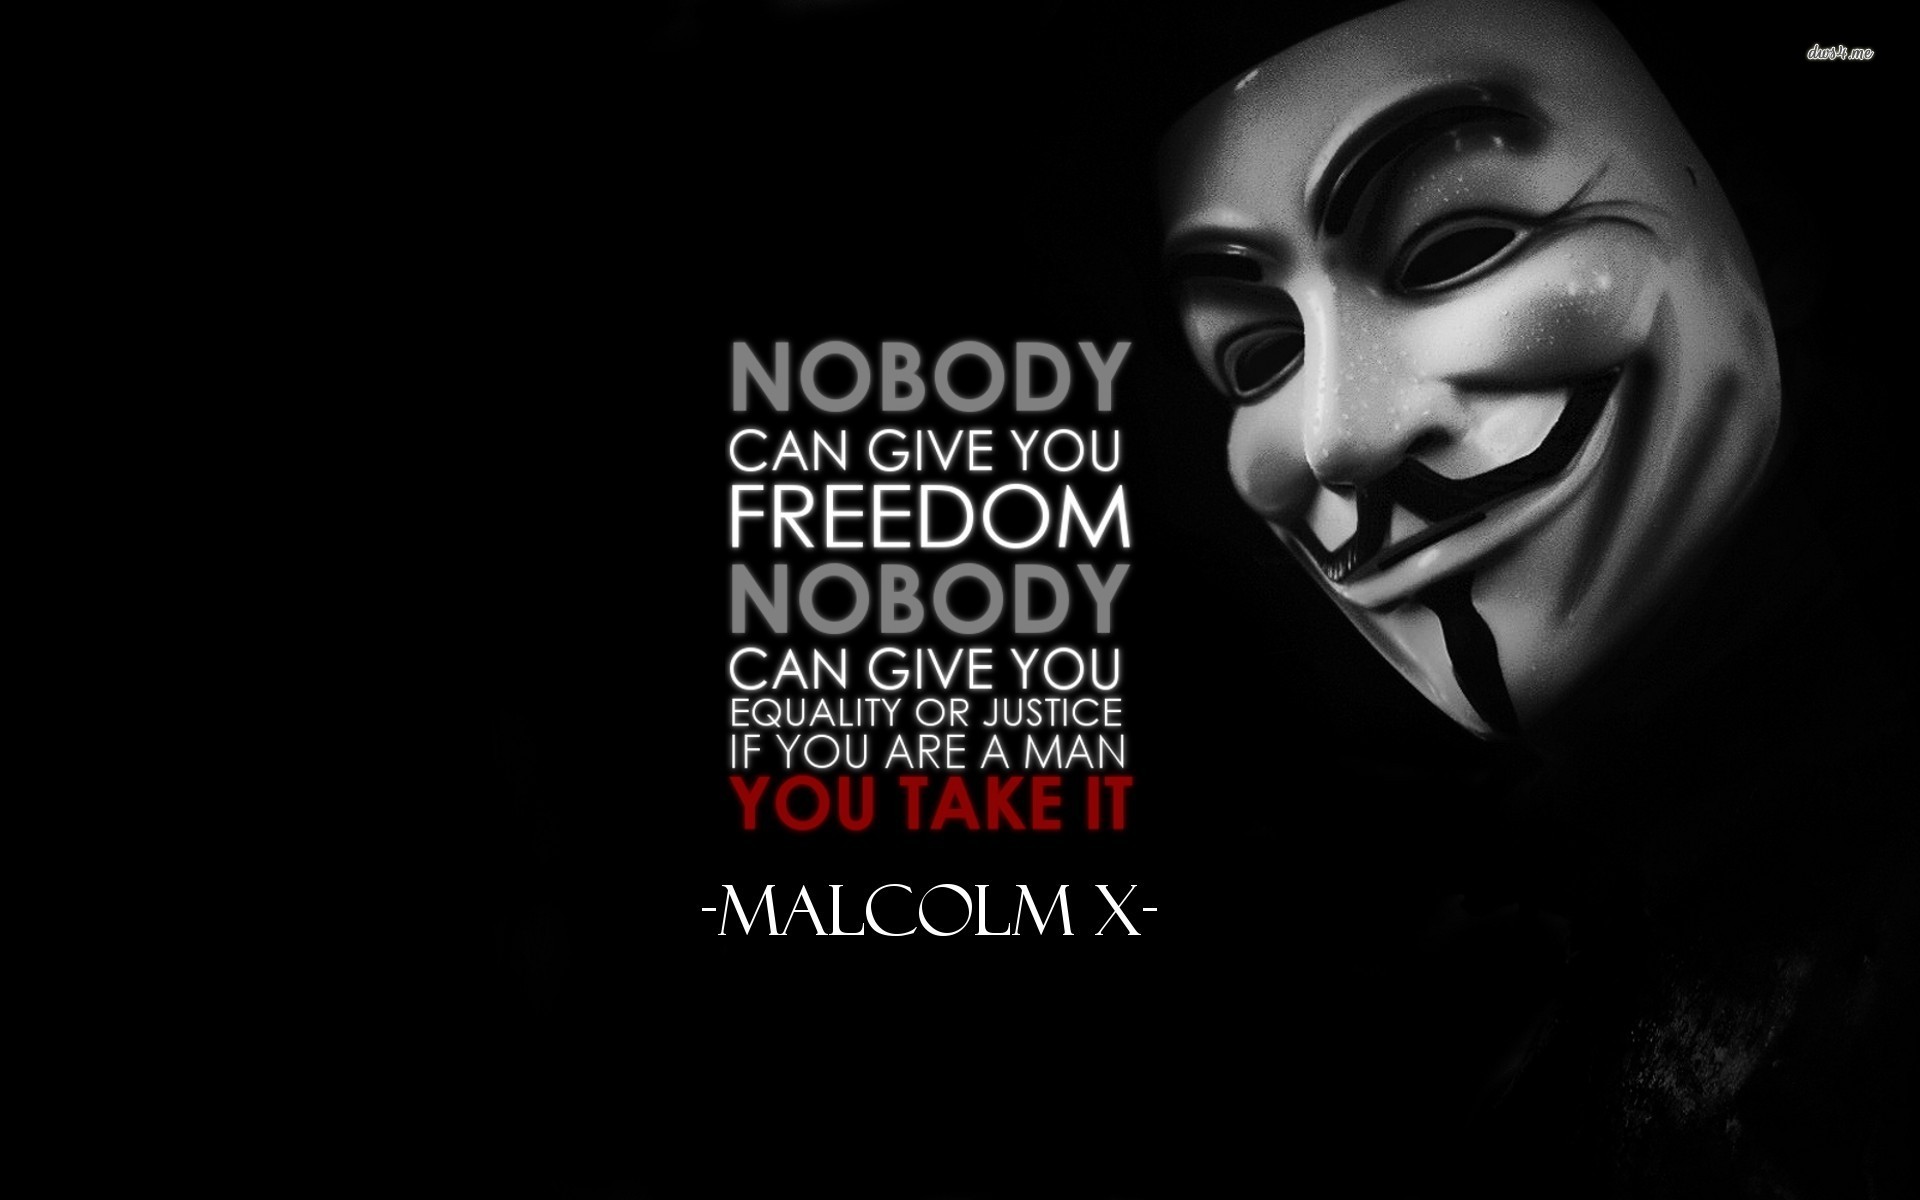 Nobody can give you freedom Nobody can give you equality or justice or anything